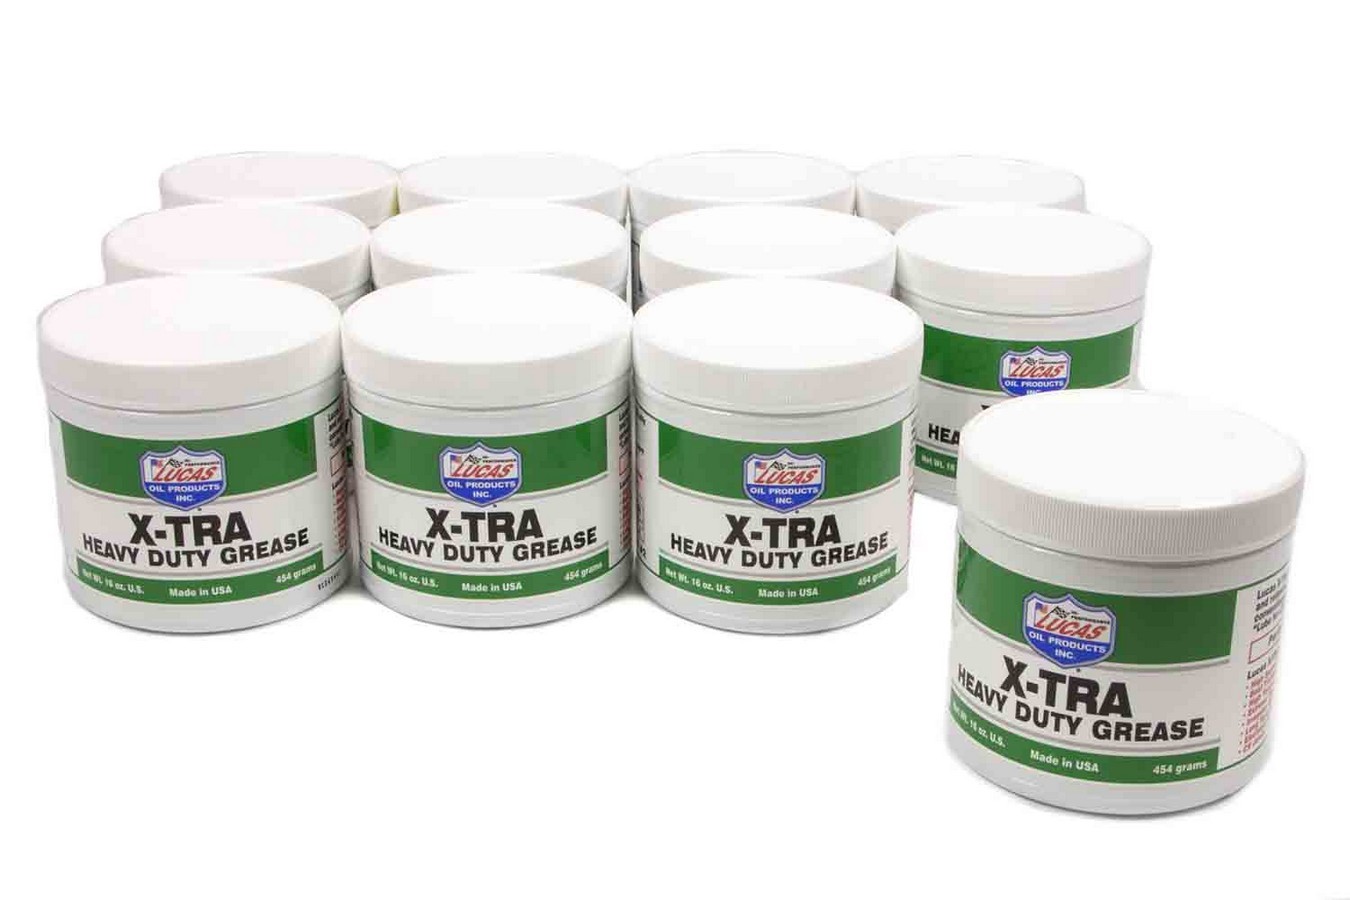 Grease - X-Tra Heavy Duty - Conventional - 1 lb Tub - Set of 12